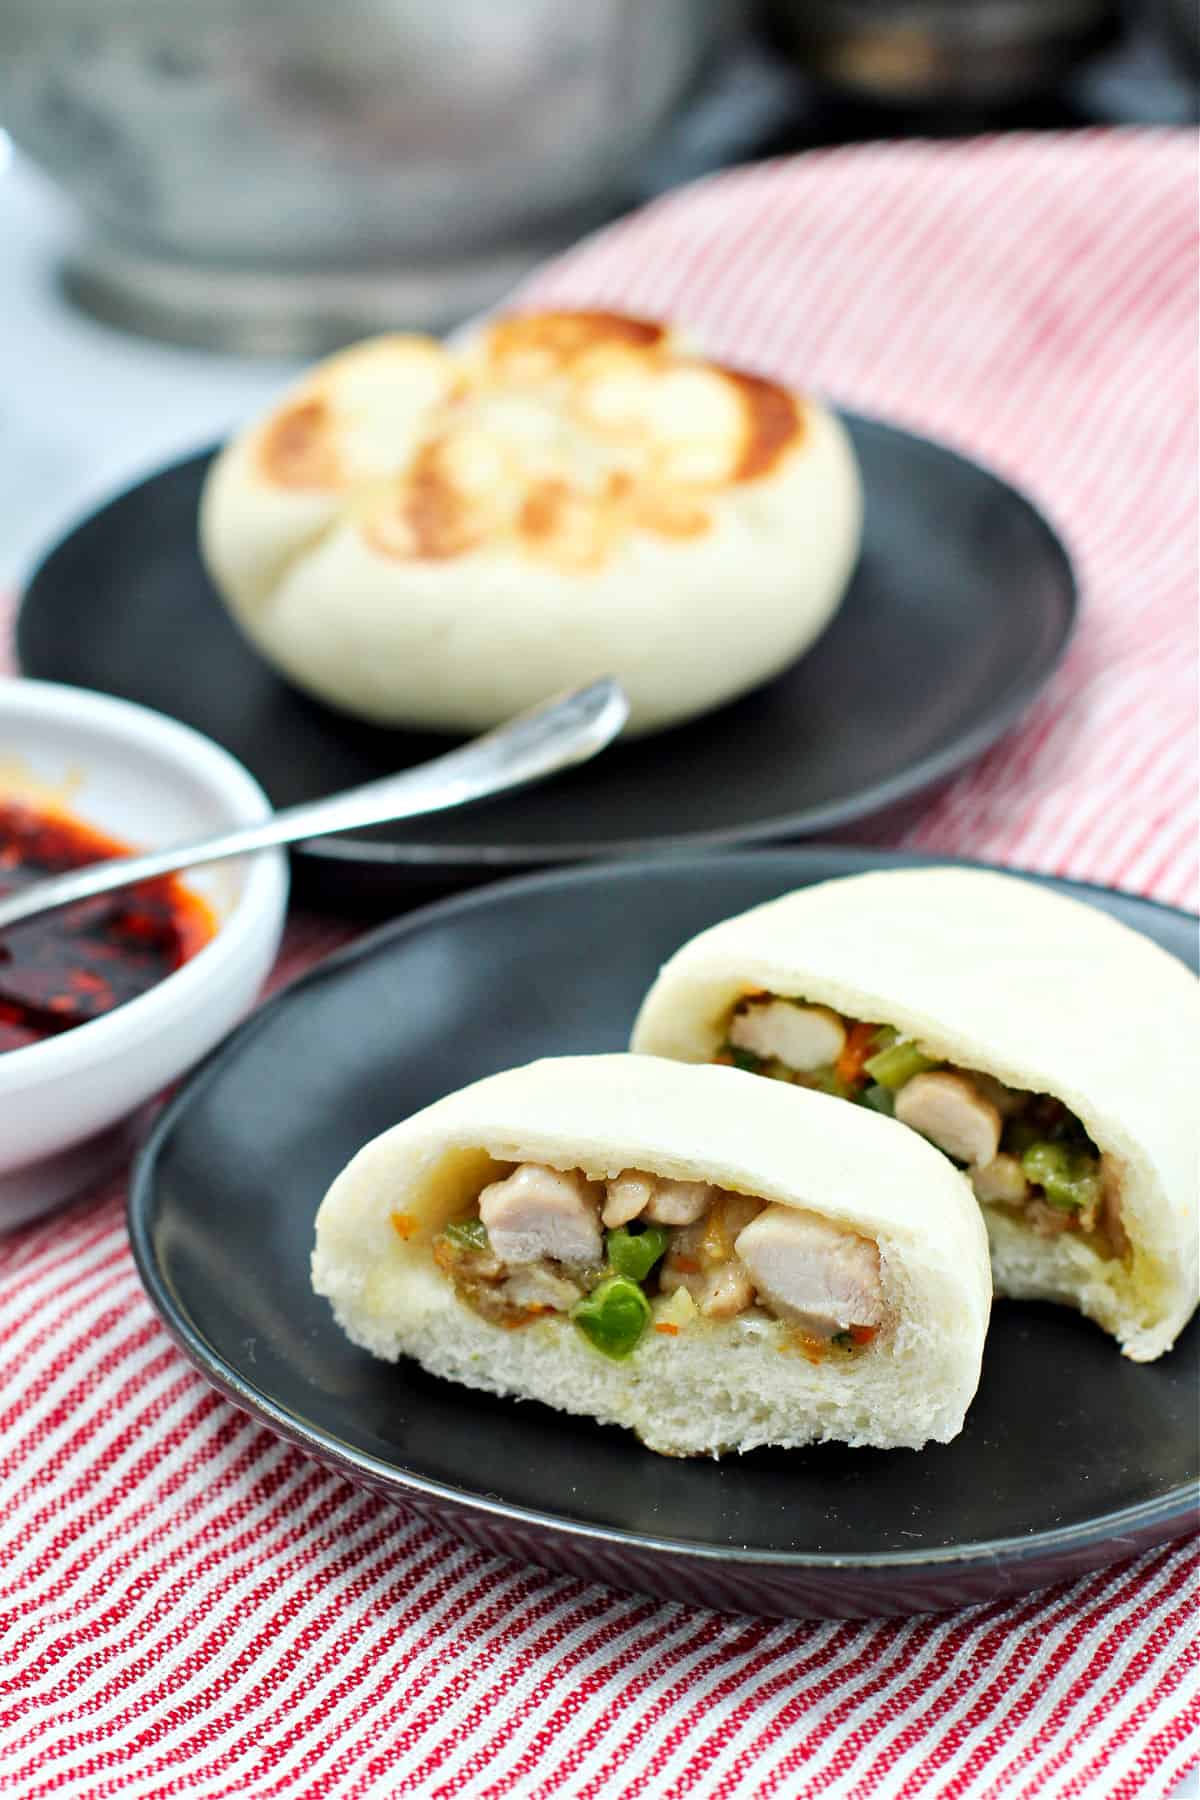 Steamed Chicken and Vegetable Buns on plates.